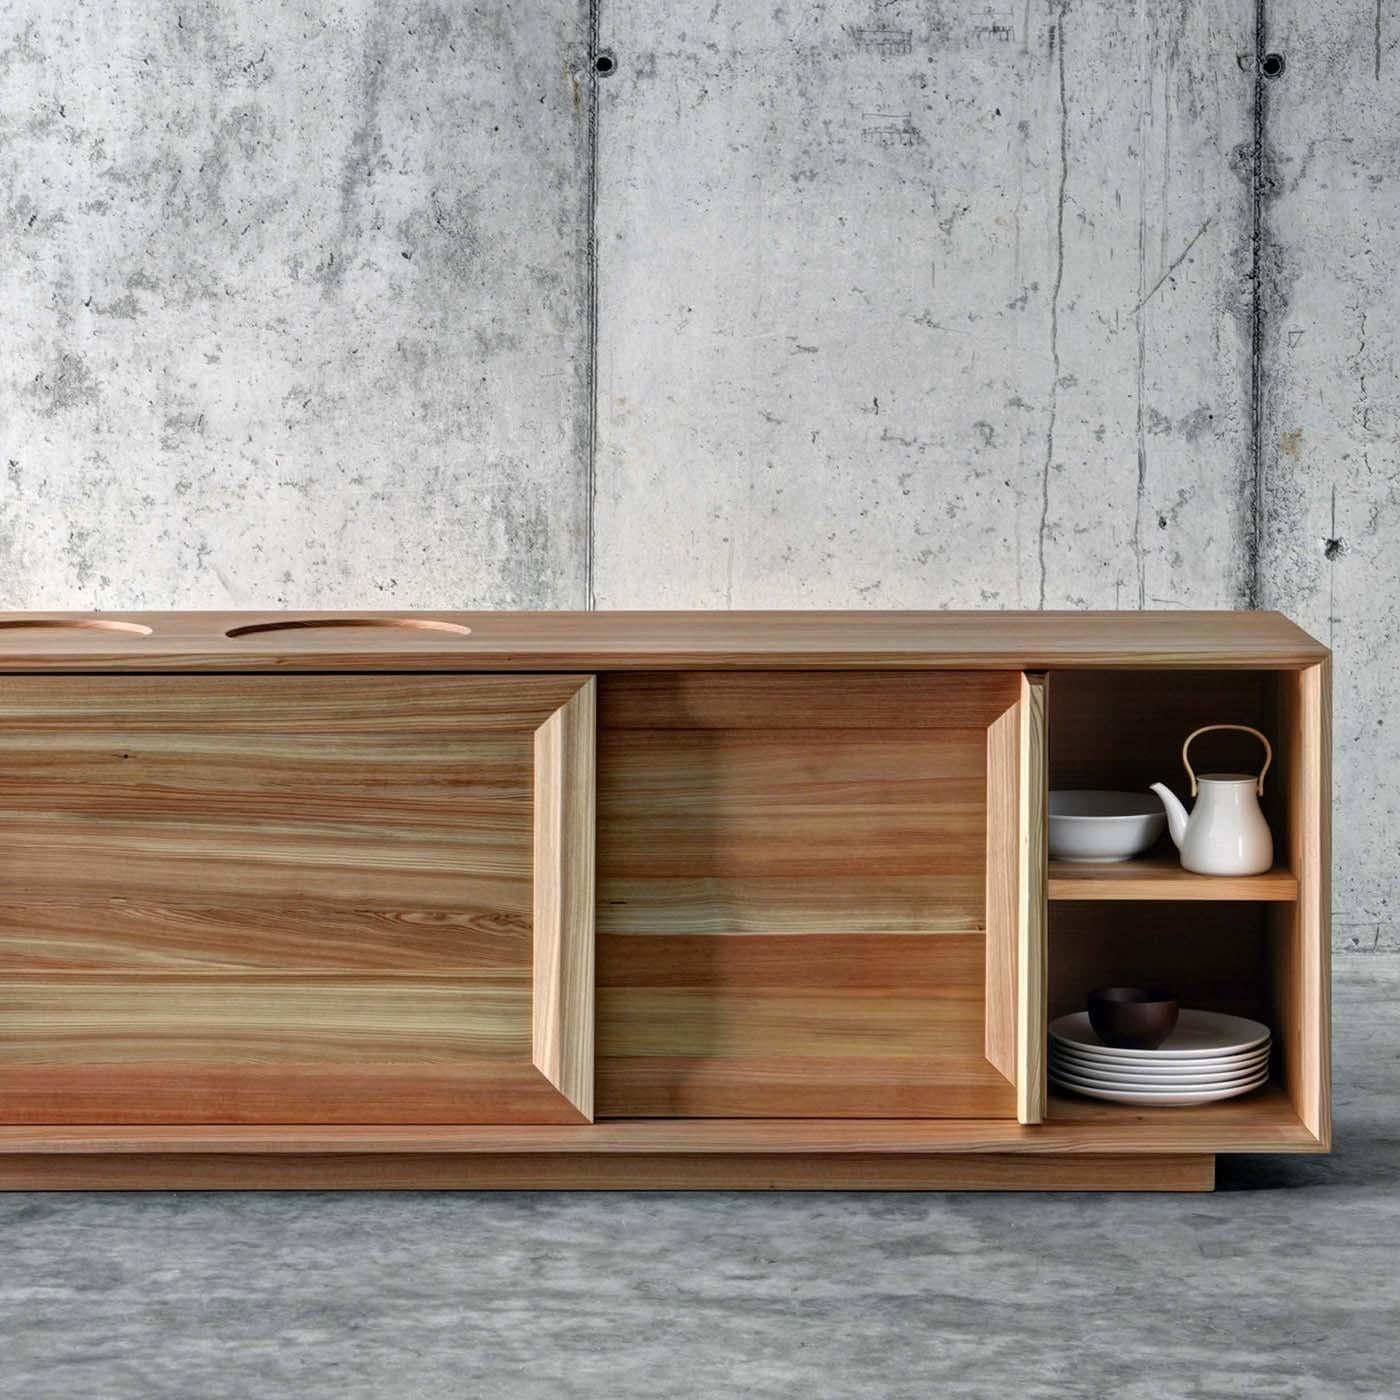 Designed by Act_Romegialli, this elegant and timeless cupboard will be a striking presence in any home. Its rectangular shape was crafted entirely of solid larch with the front featuring two sliding framed doors with tapered wood handles that open